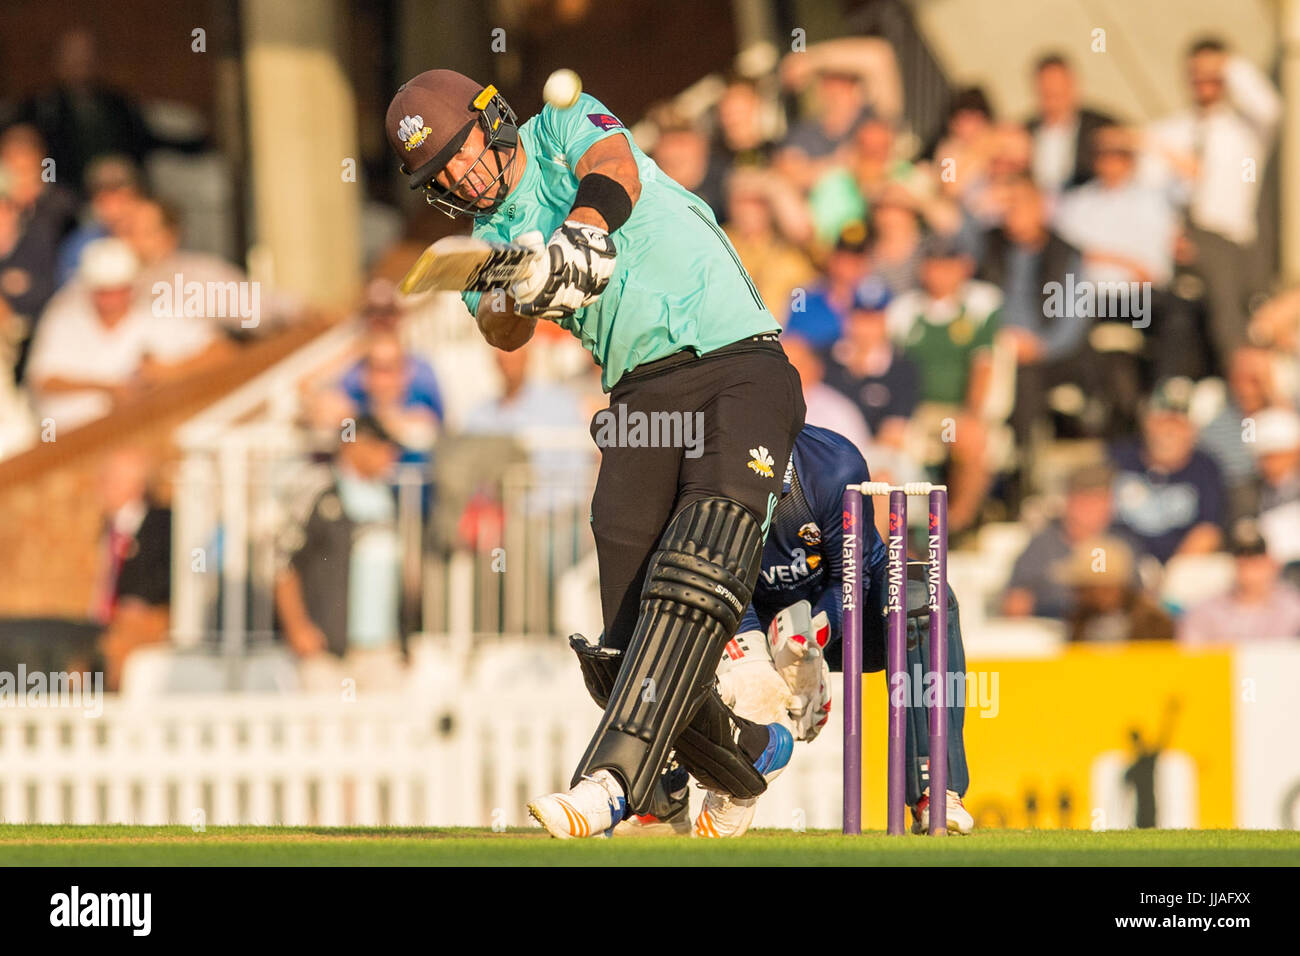 London, UK. 19th July, 2017. Kevin Pietersen hits a six batting for Surrey against Essex in the NatWest T20 Blast match at the Kia Oval. Credit: David Rowe/Alamy Live News Stock Photo